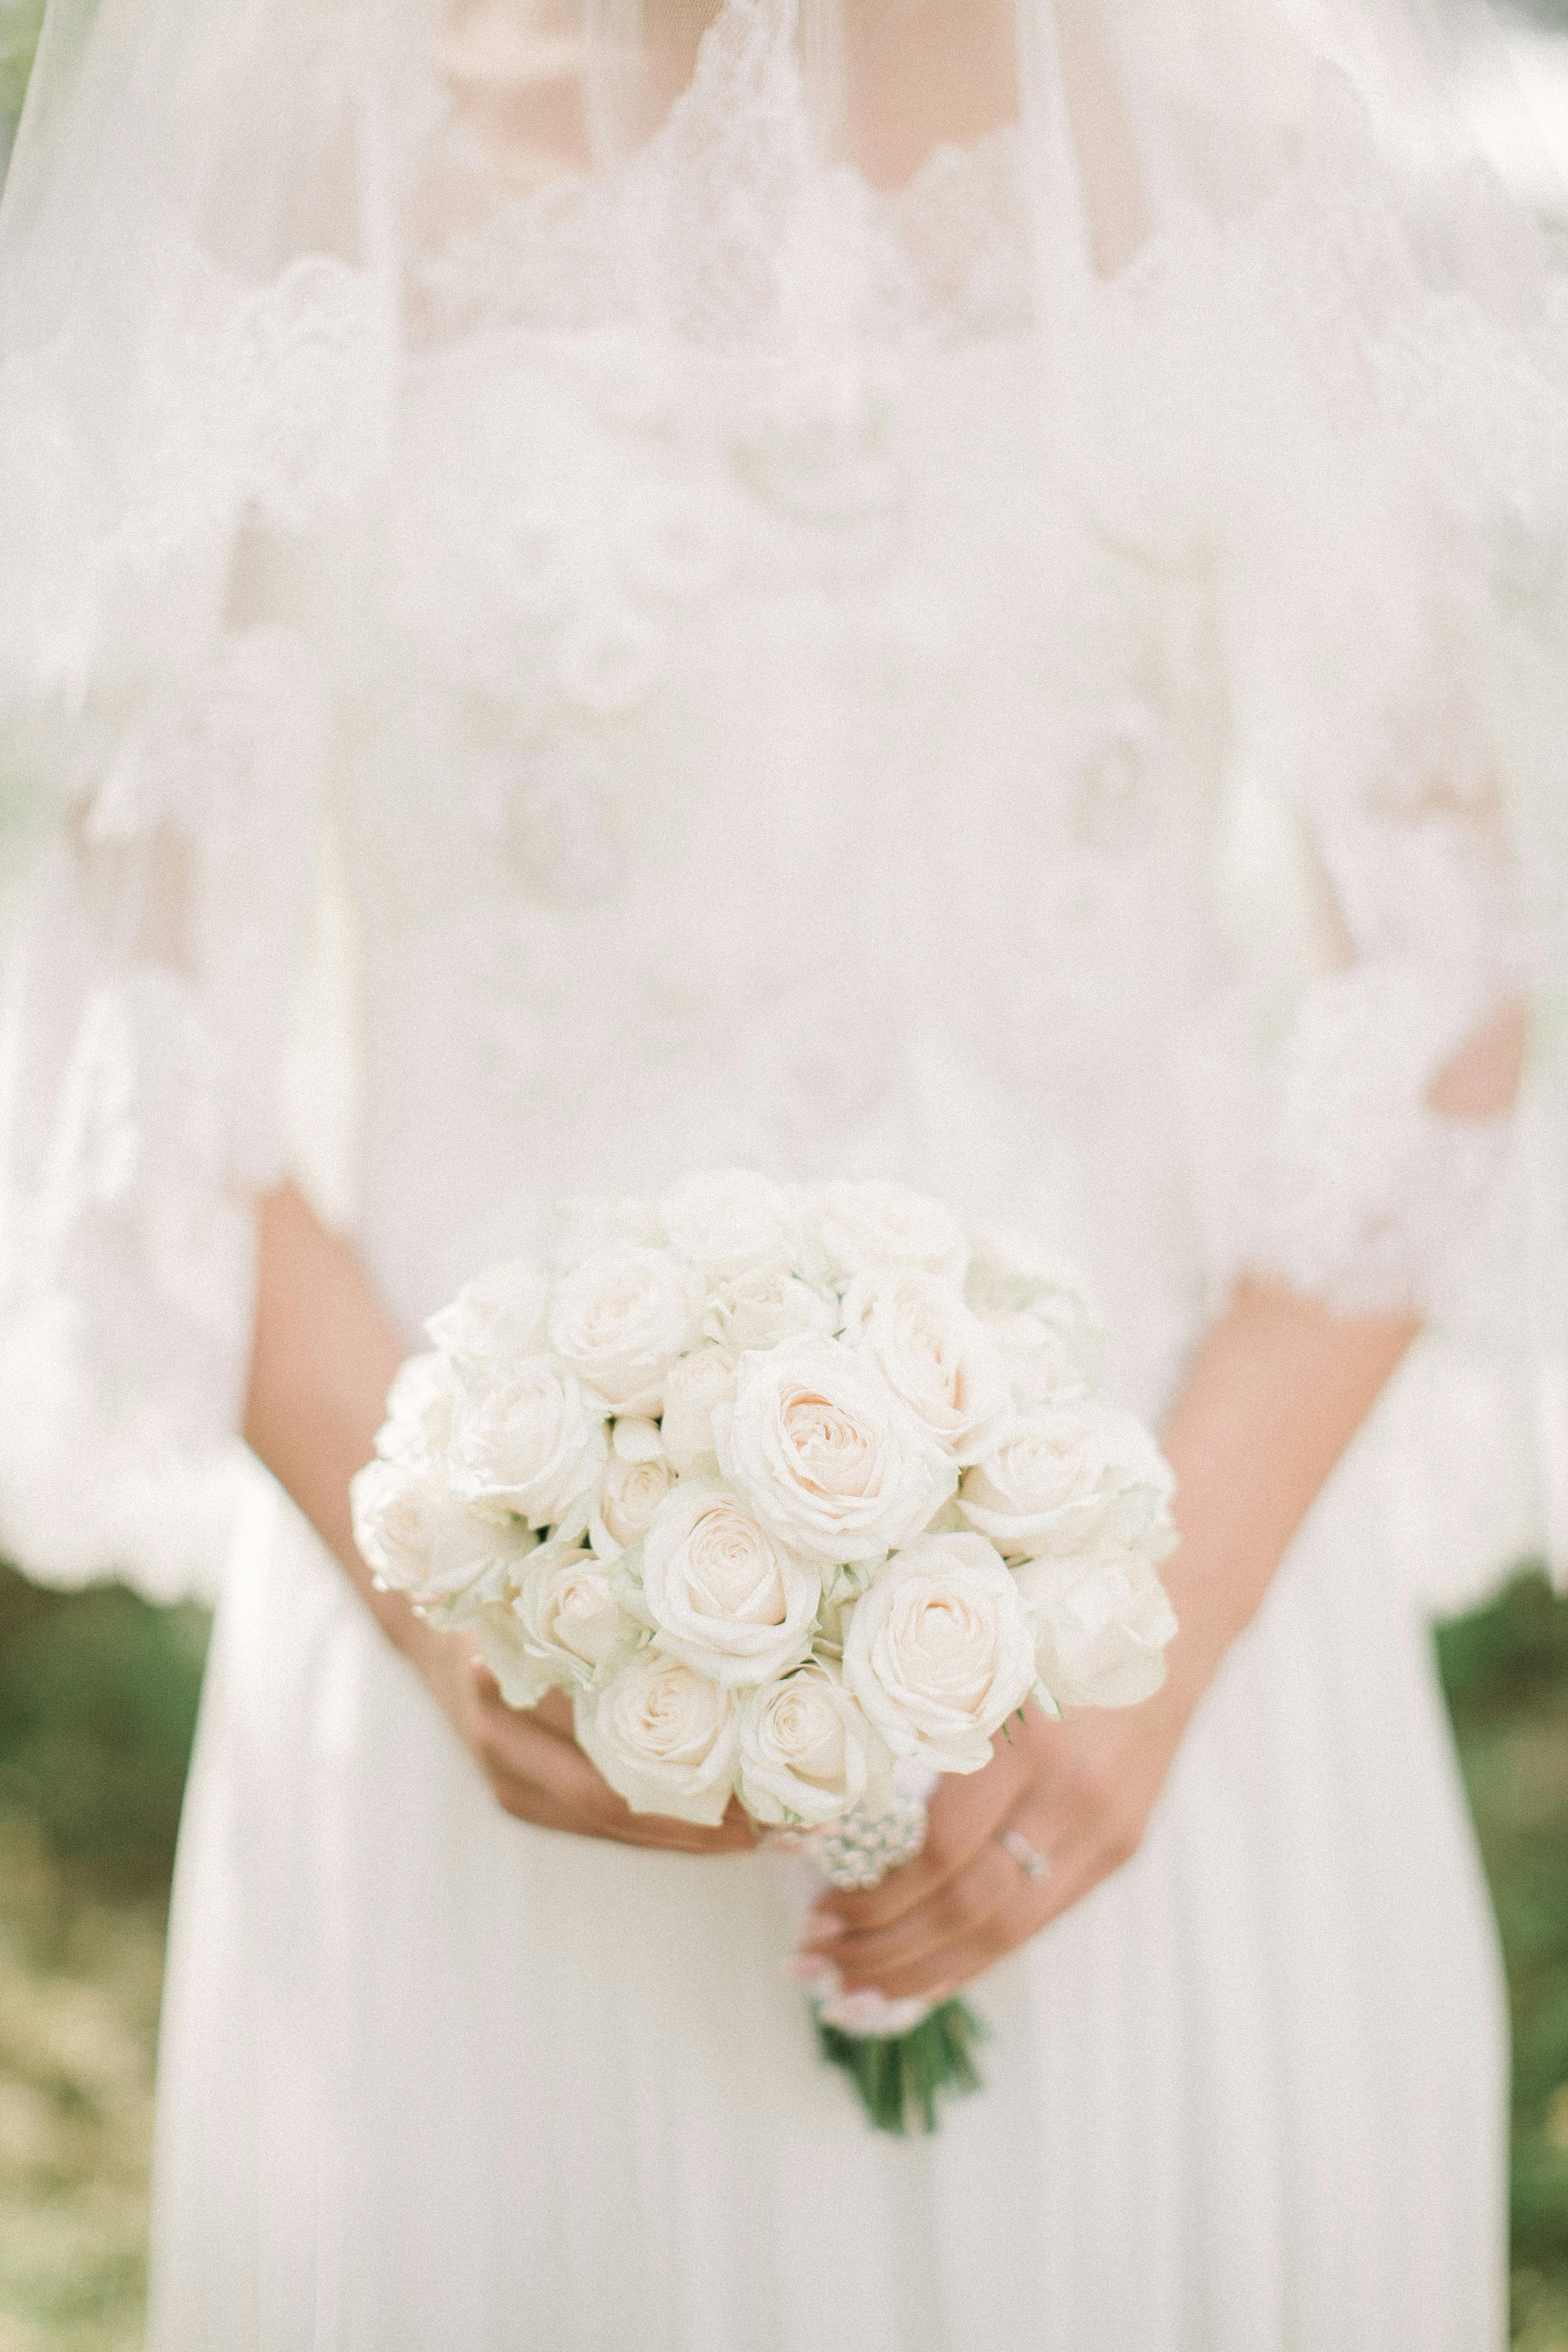 A bride holding white flowers | Source: Pexels